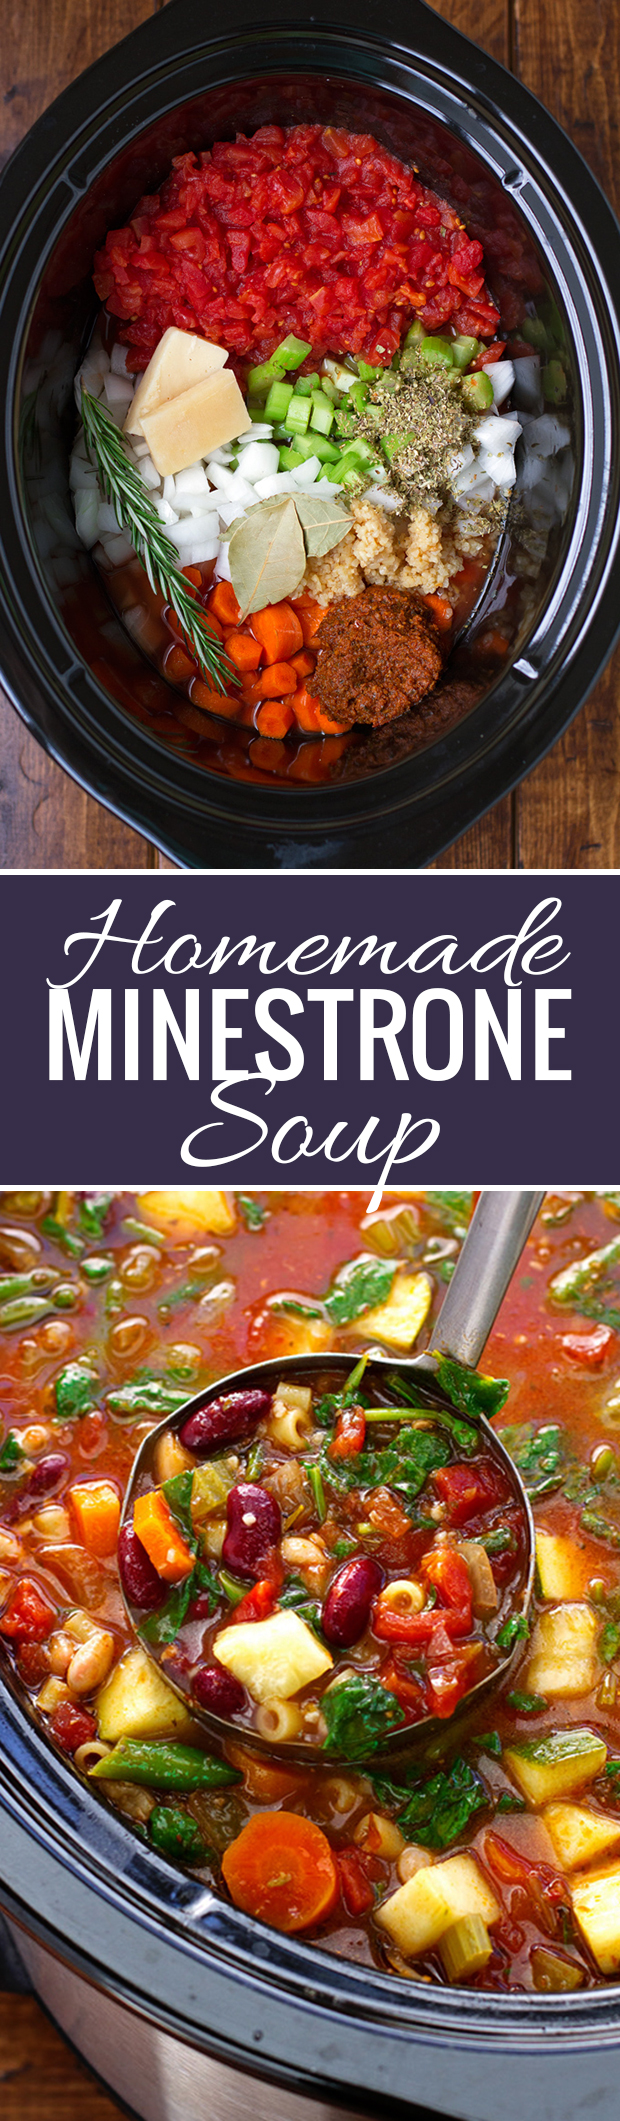 Homemade Minestrone Soup {Slow Cooker} made with a secret ingredient, this soup is perfect for chilly evenings! #minestronesoup #crockpot #slowcooker #minestrone | LIttlespicejar.com 